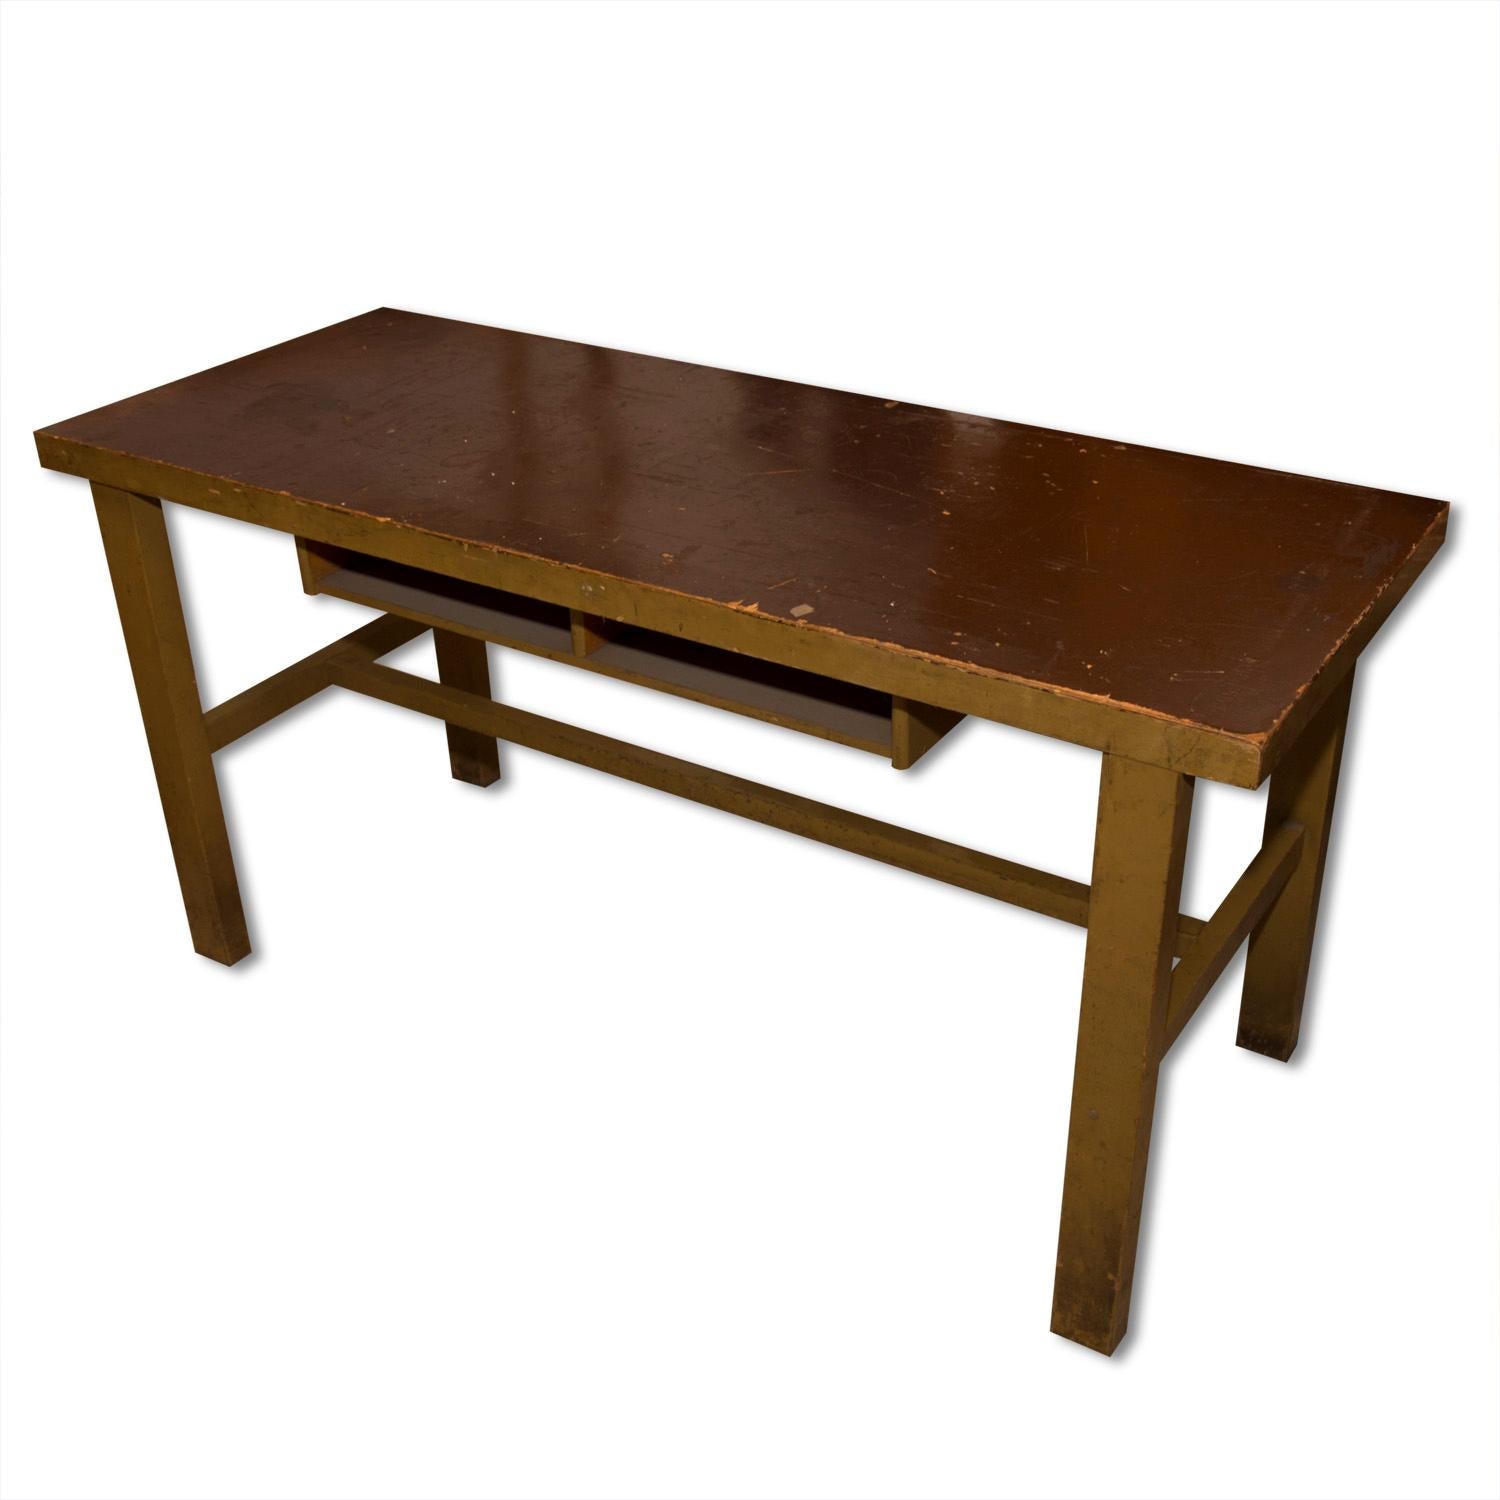 This Industrial workbench was made in the former Czechoslovakia in the 1930s

This desk was originally most likely used as a school desk. Under the tabletop is a divided compartment for documents.

The desk is overall in good vintage condition,